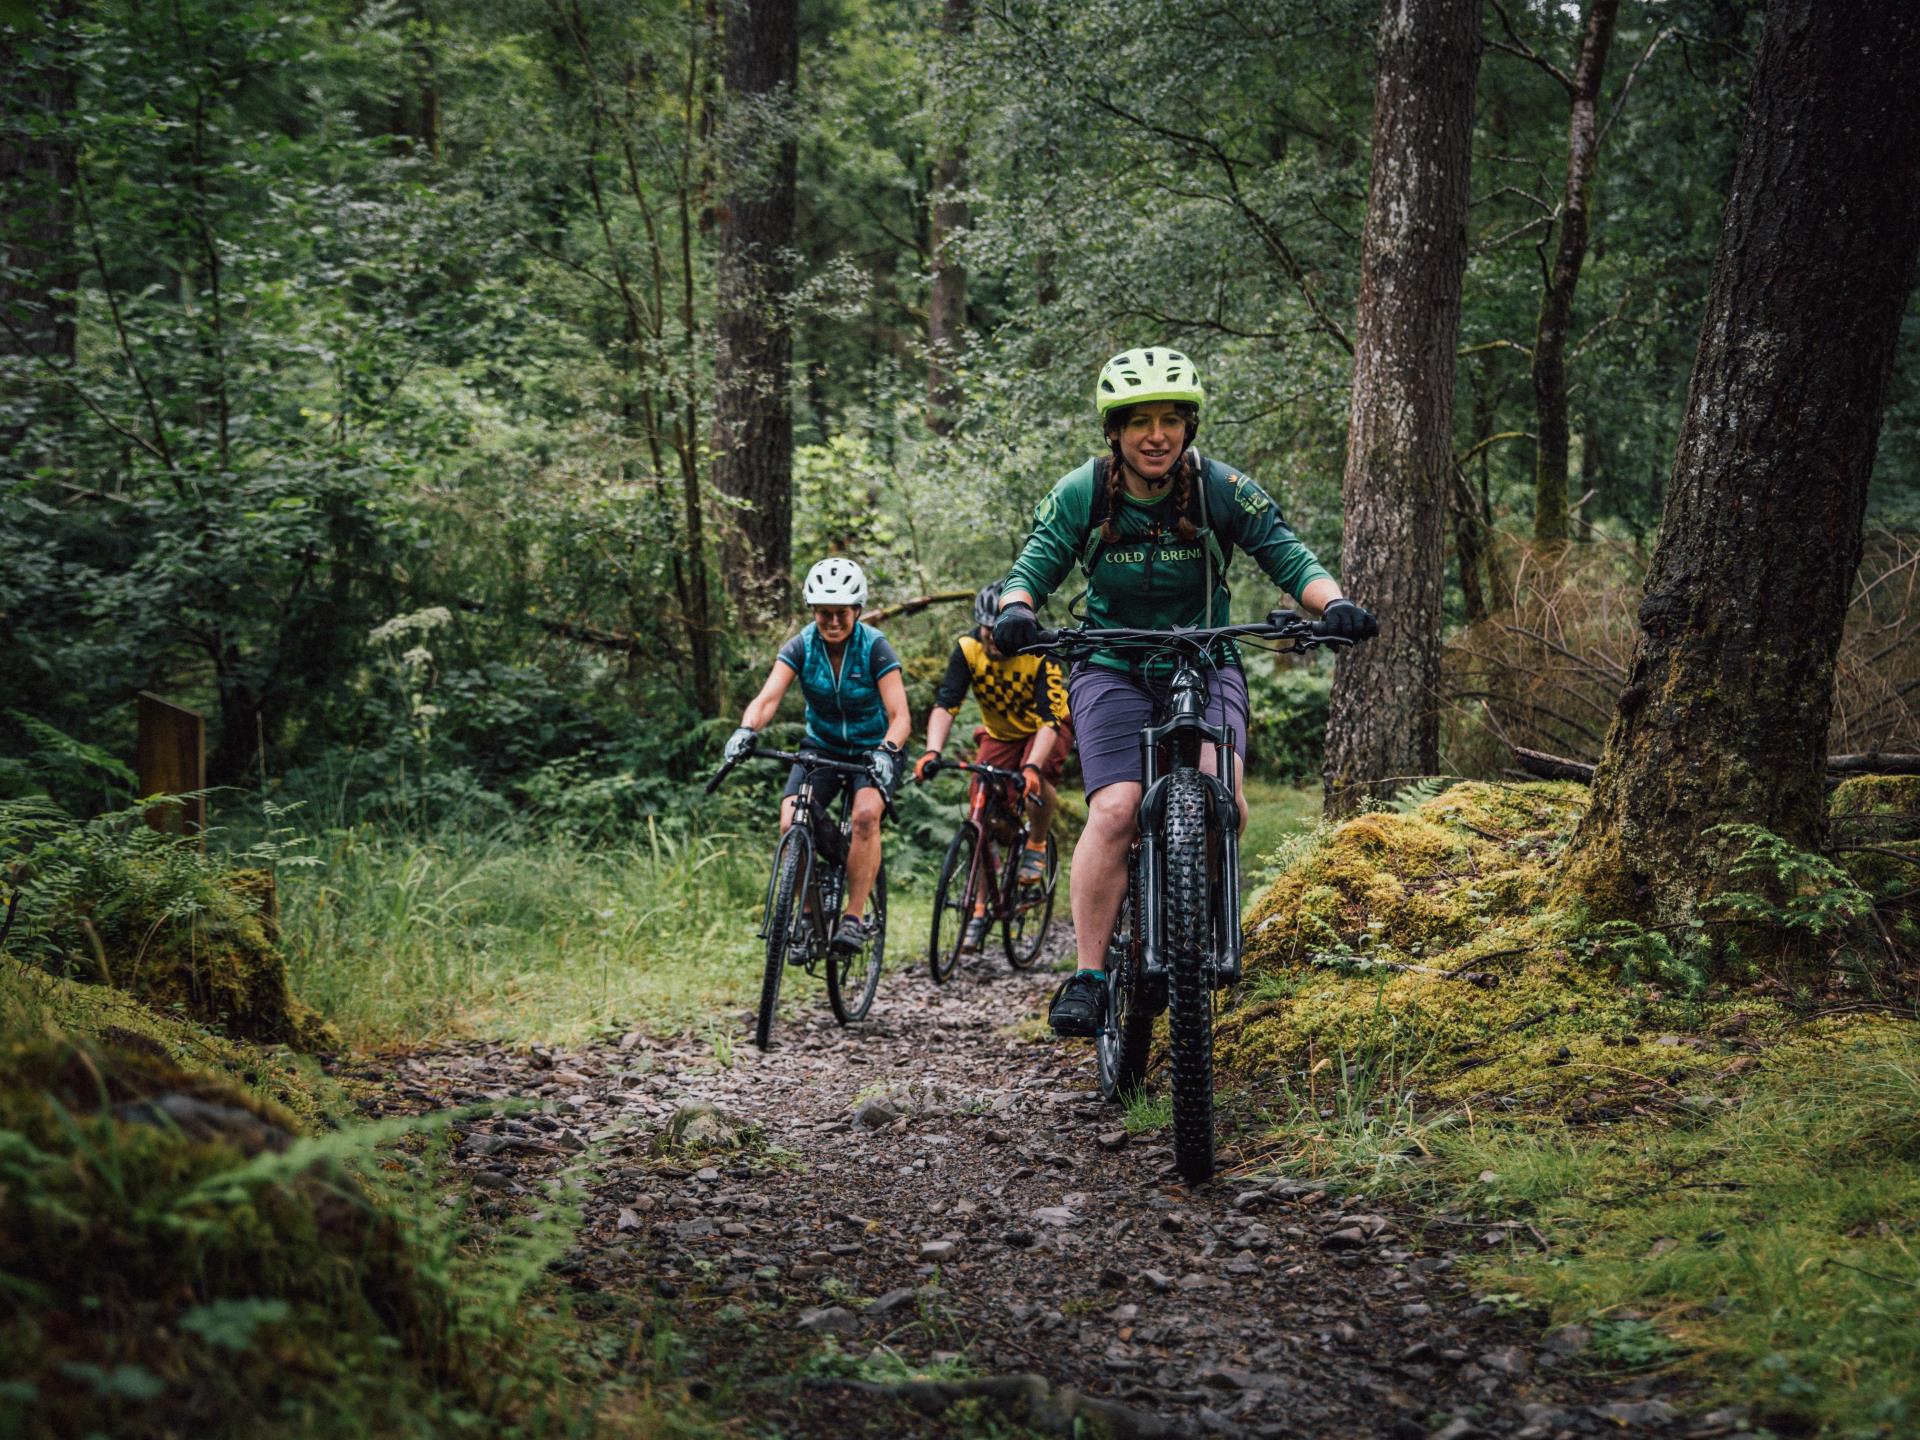 Riders on a trail from Coed y Brenin Visitor Centr